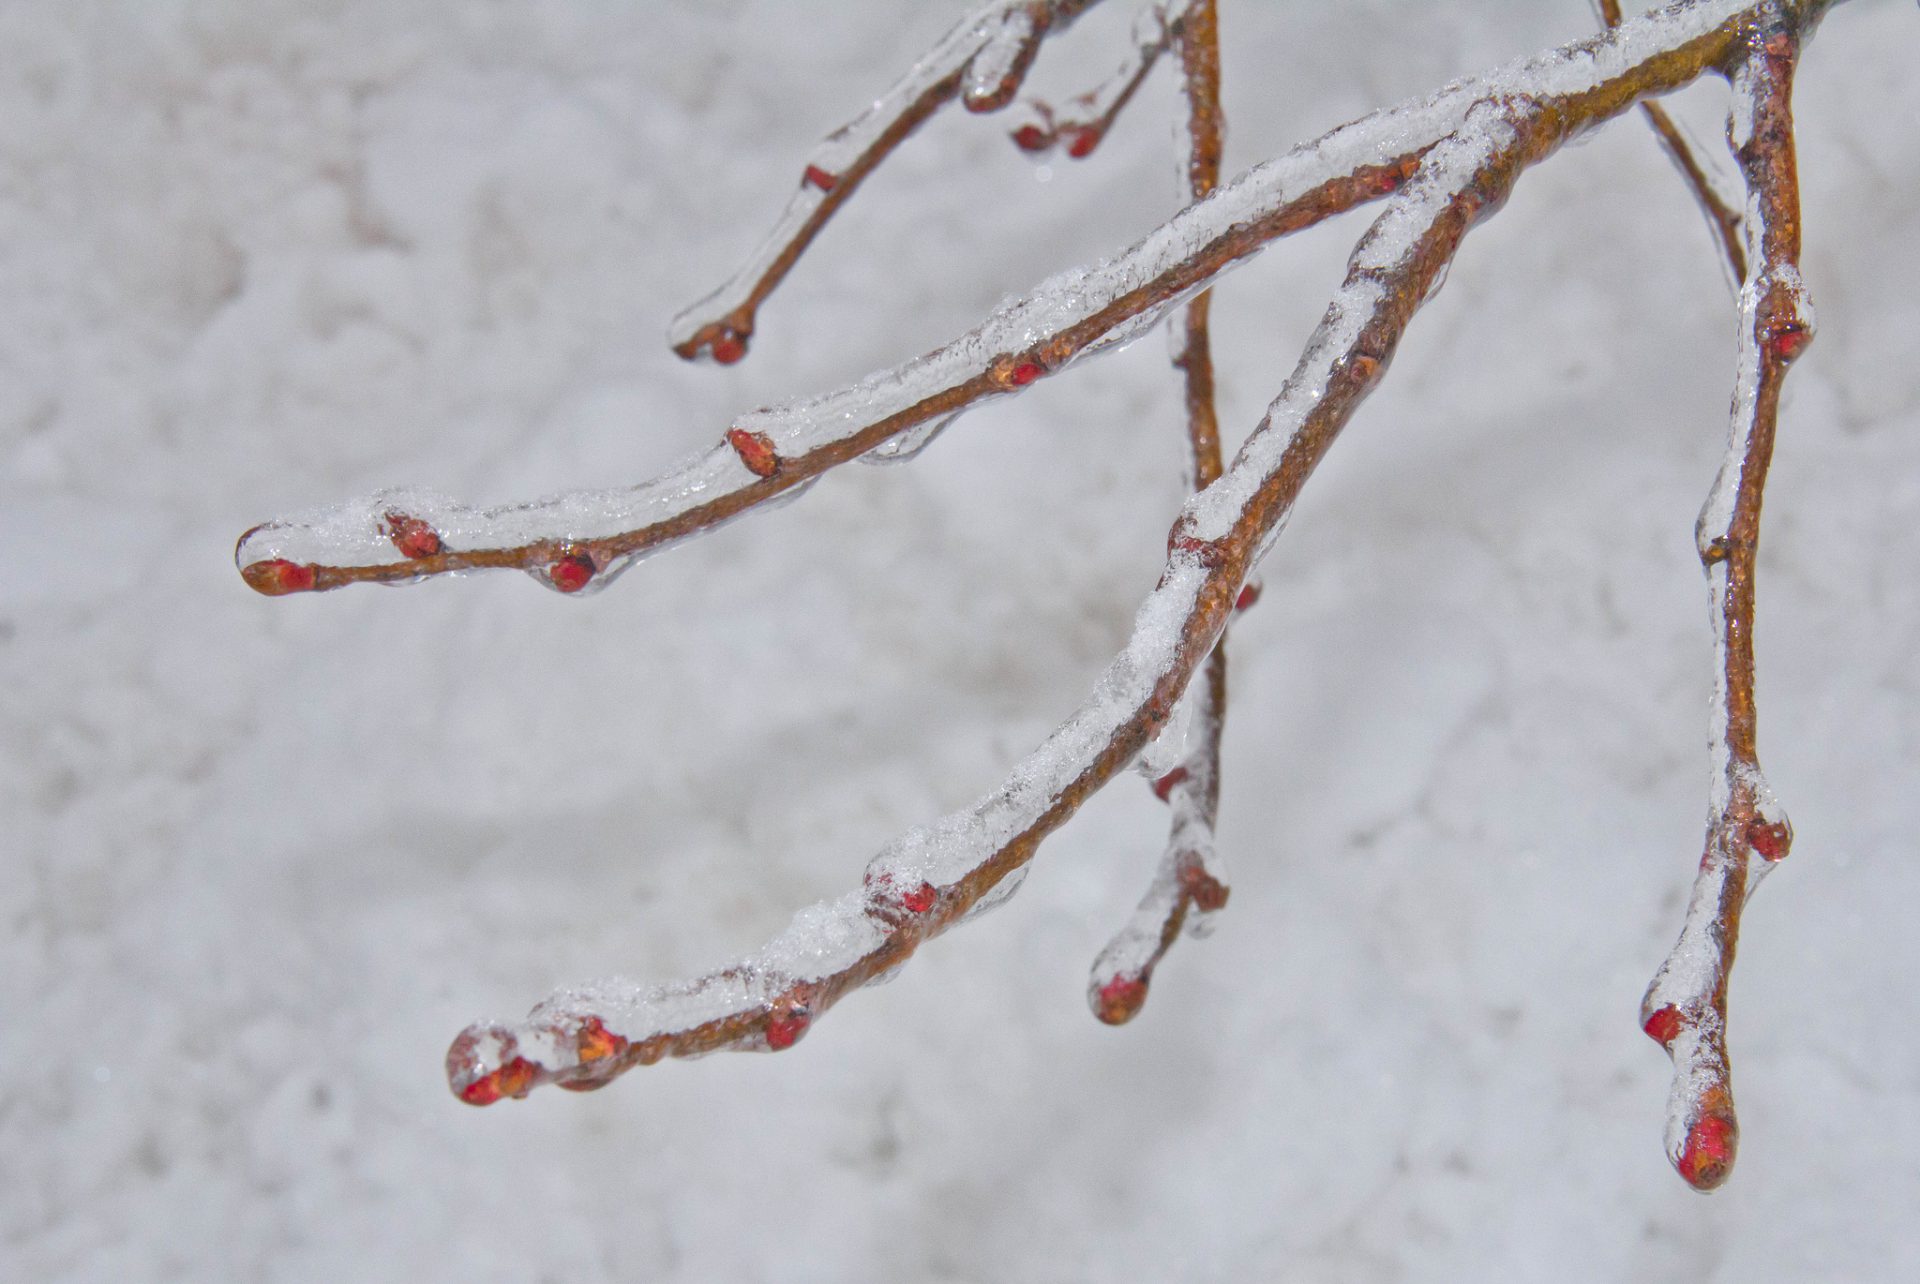 Freezing rain warning issued for Grande Prairie, Peace River area